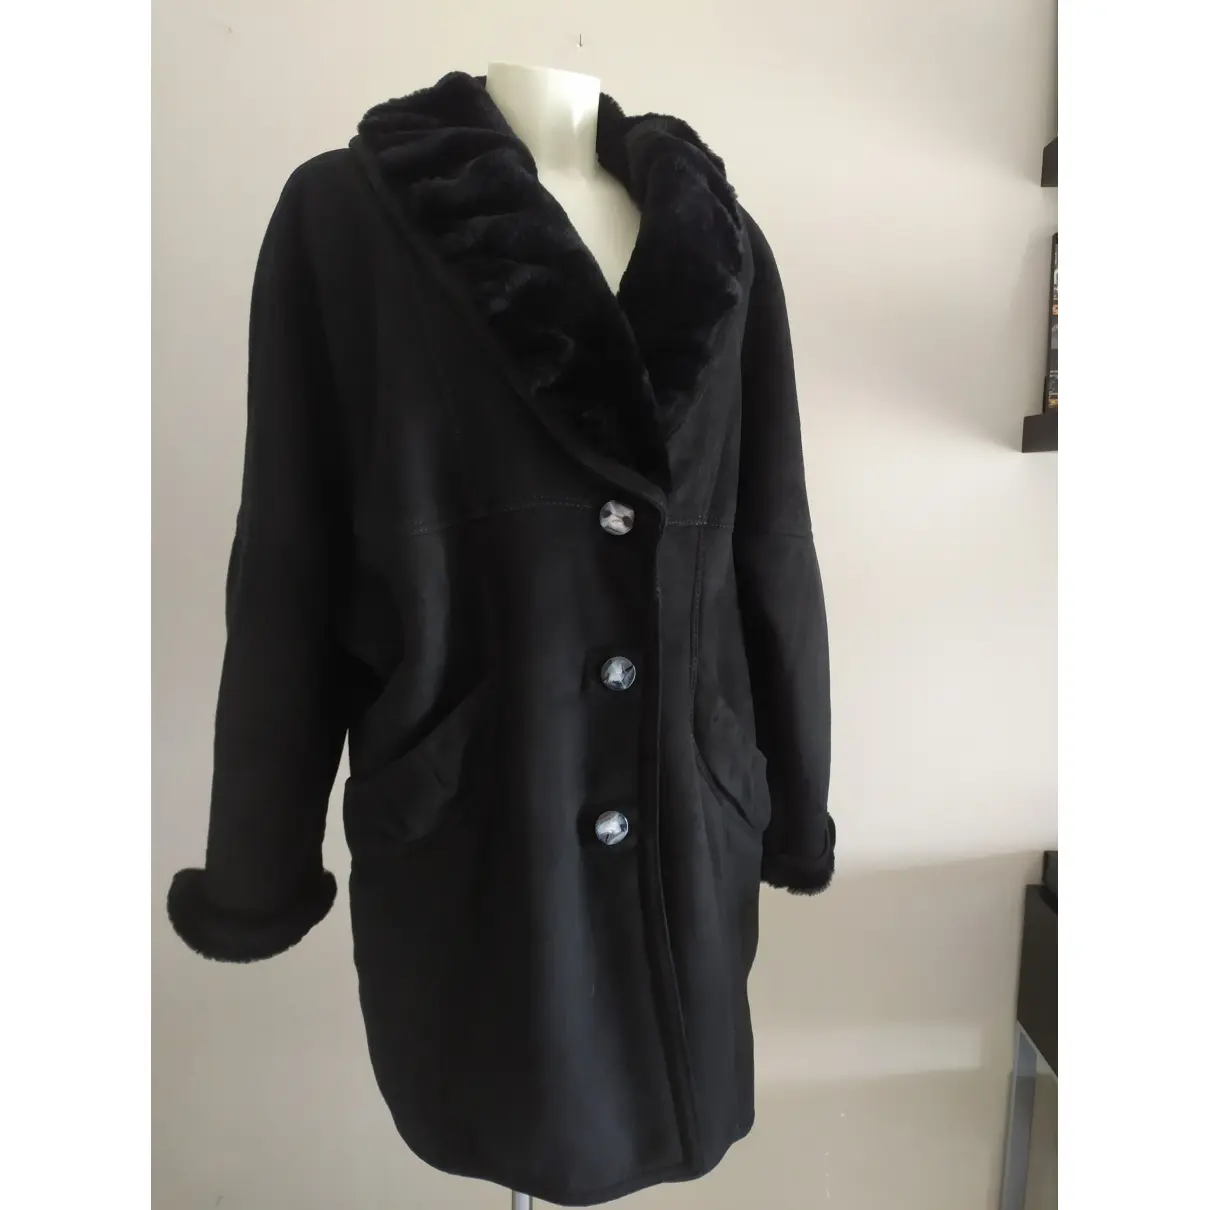 Buy Shearling Leather coat online